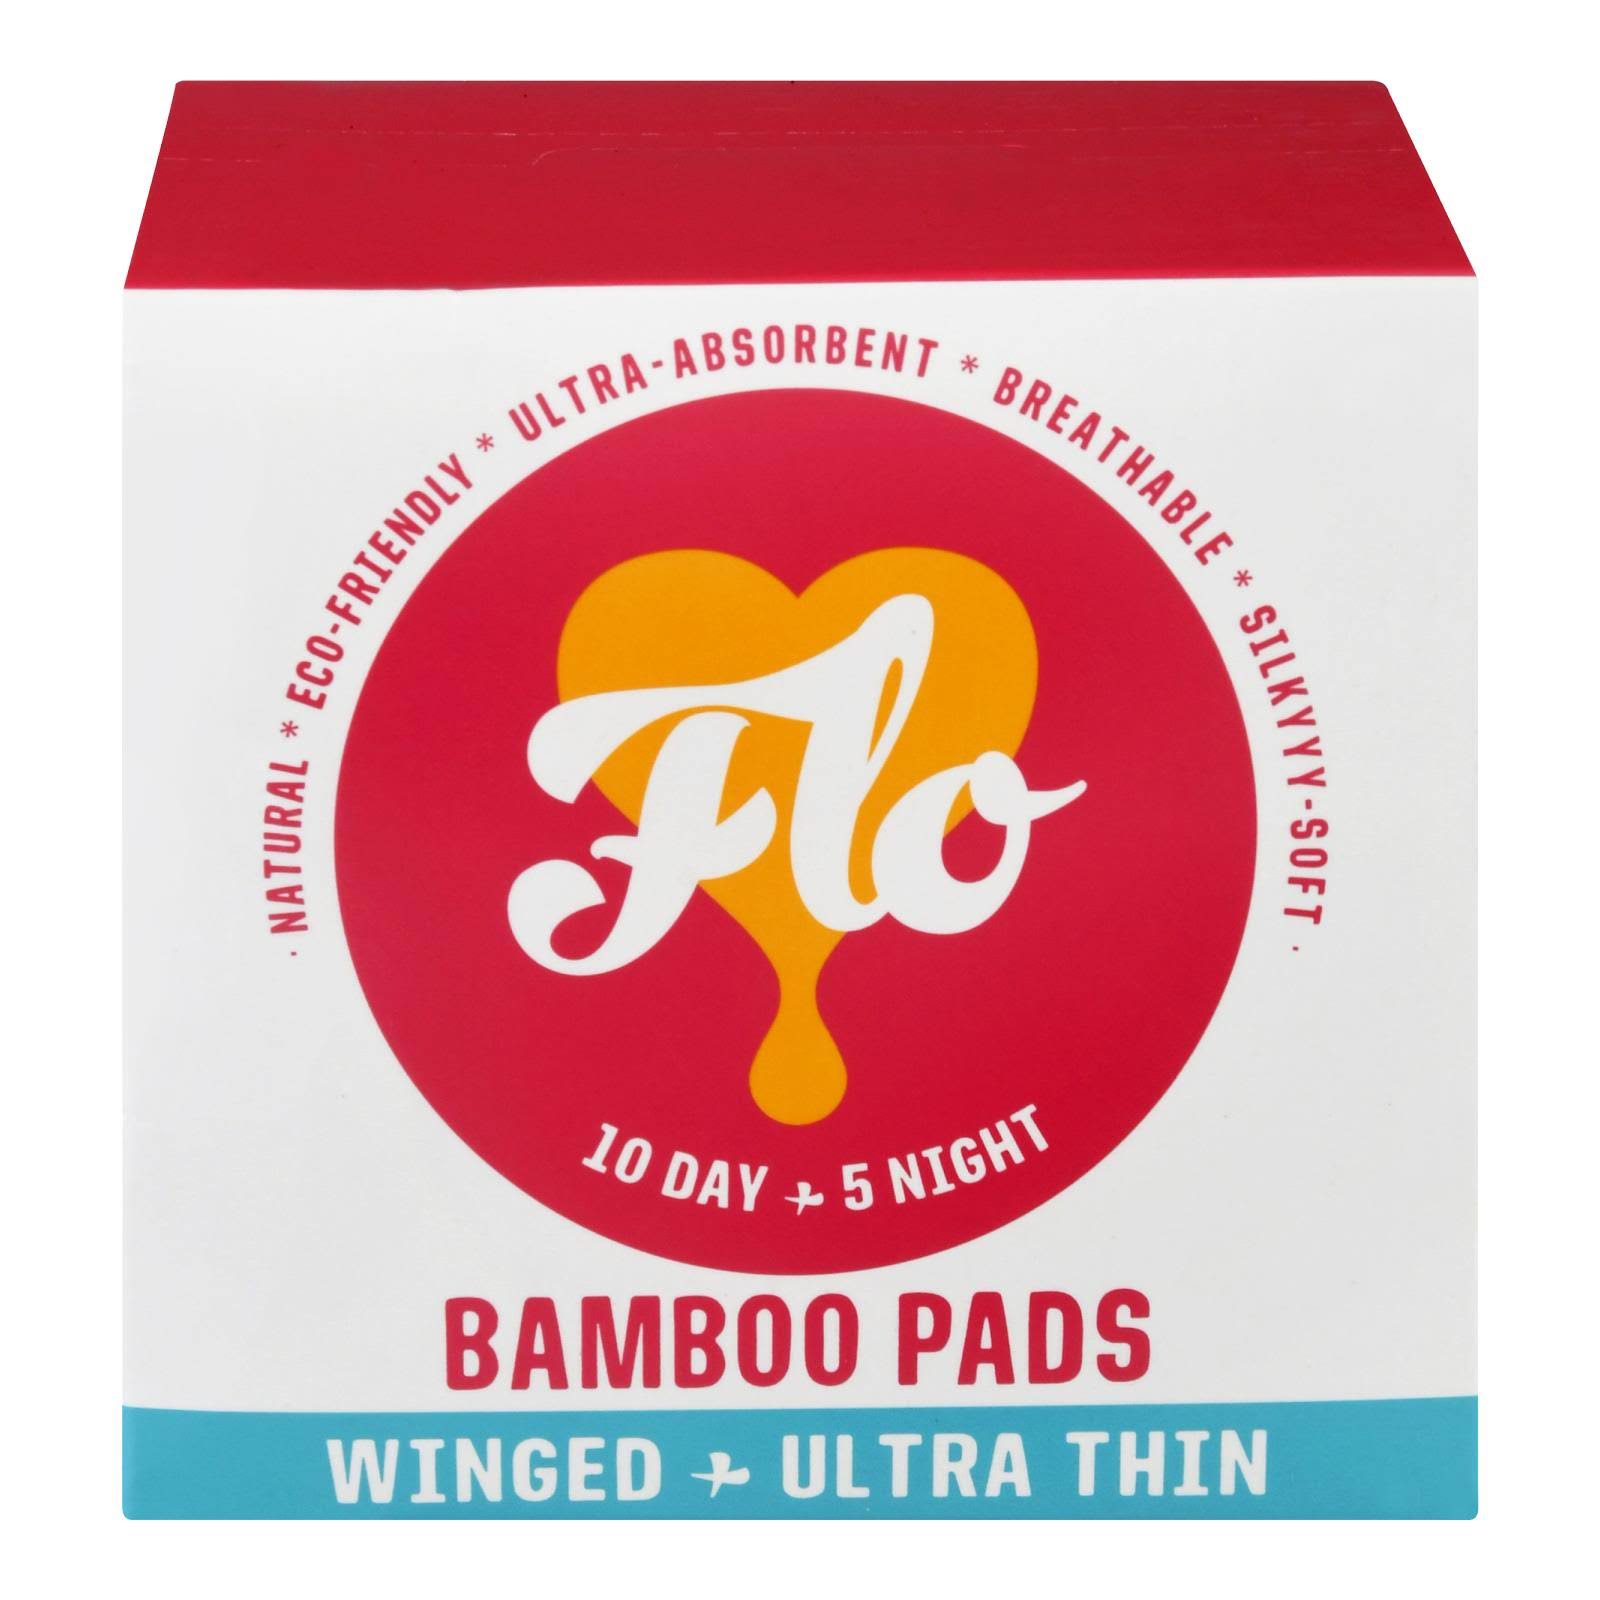 Flo Bamboo Pads, Ultra Thin, Winged - 15 pads